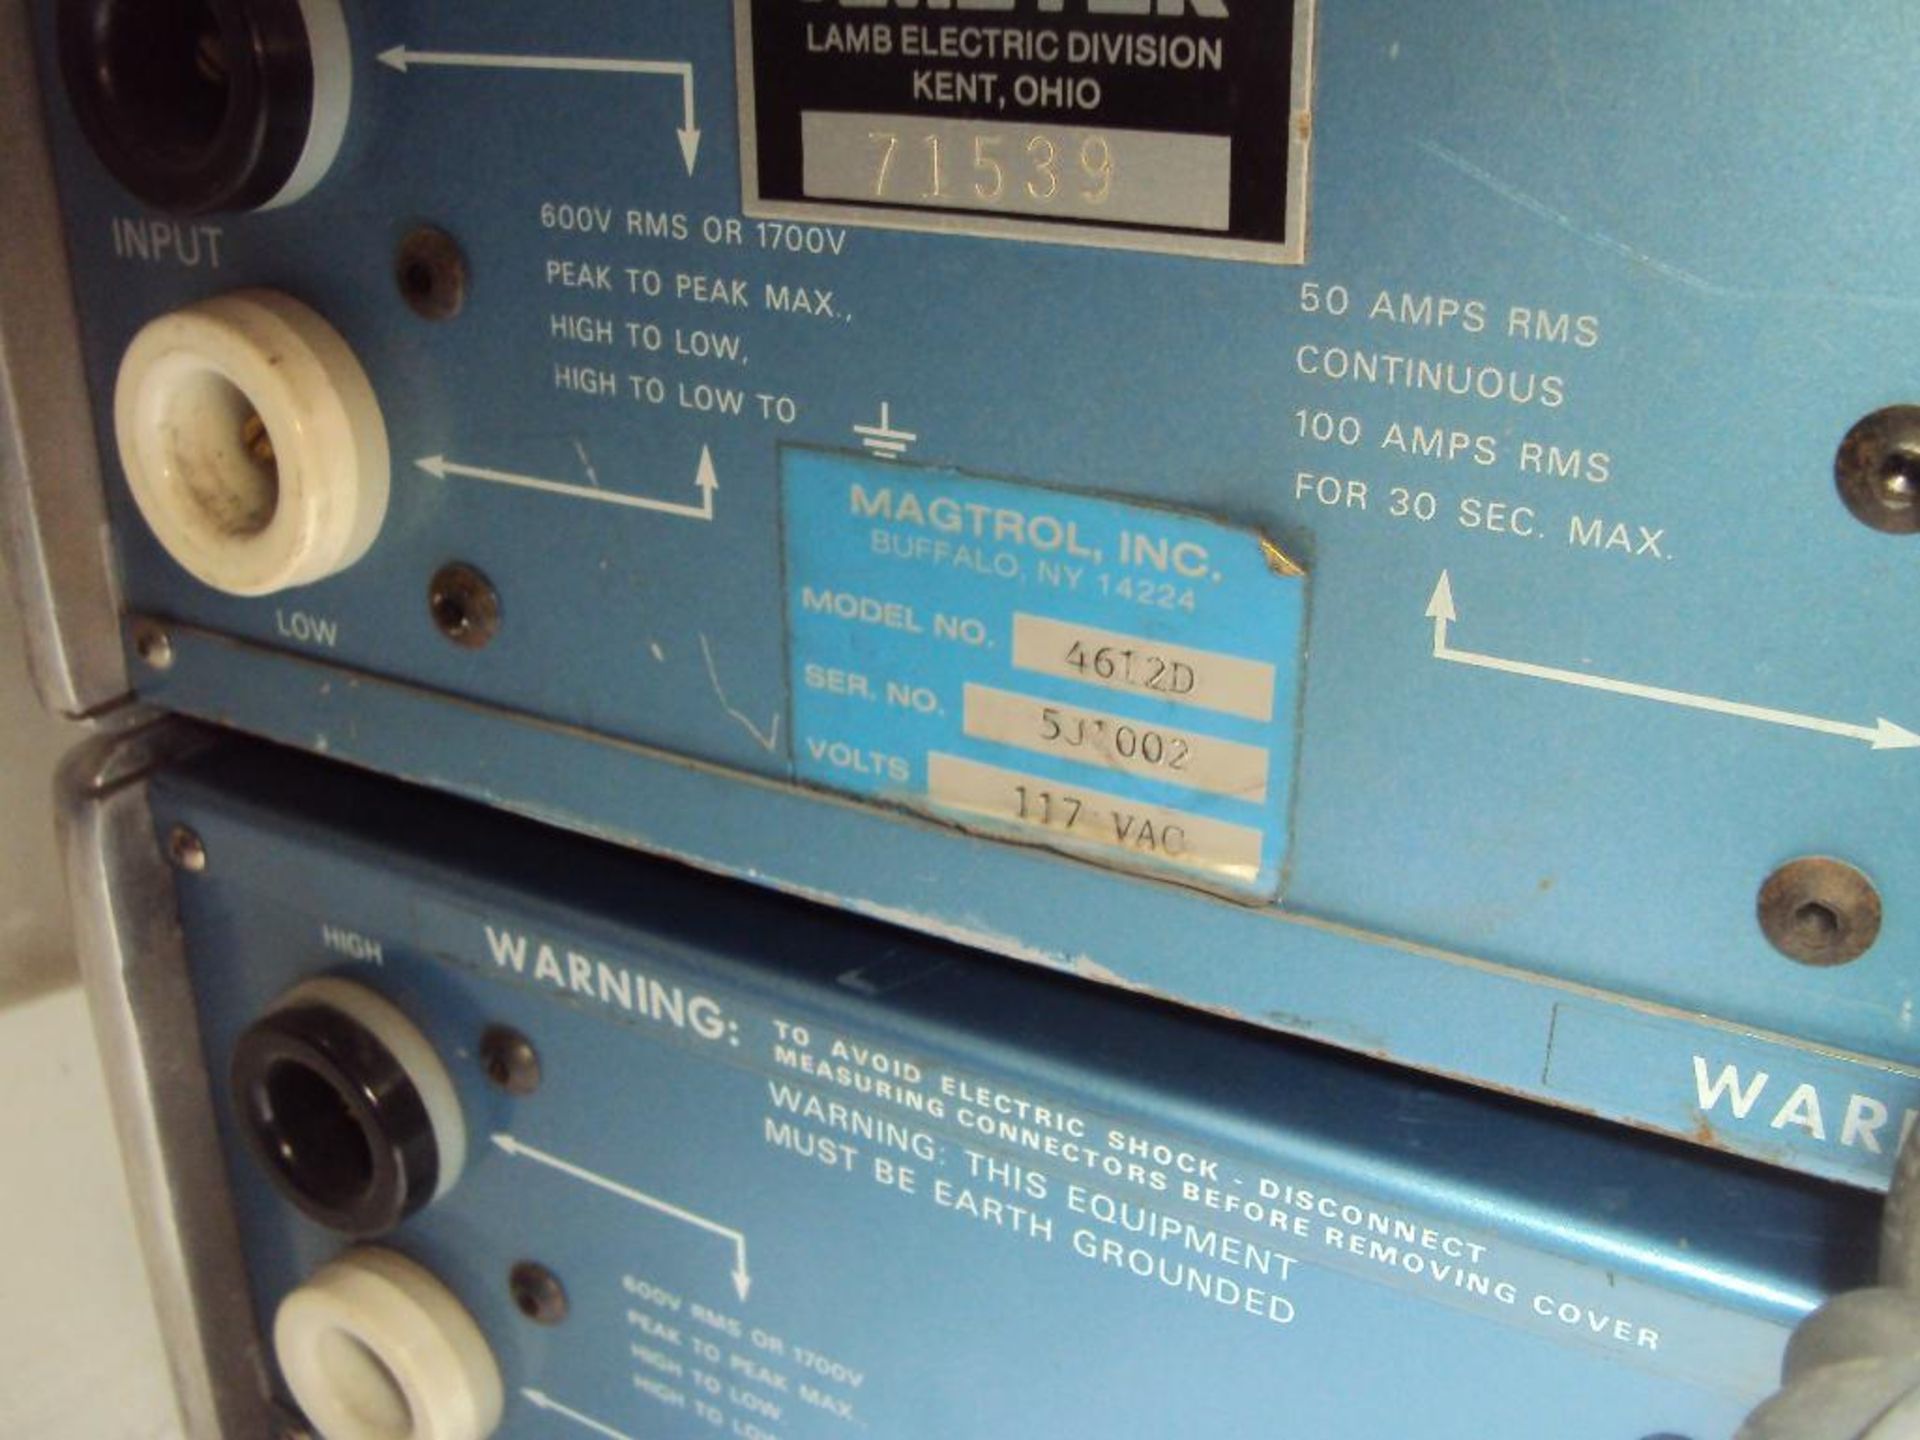 Lot of 2 Magtrol 4612D Power Analyzers - Image 5 of 5